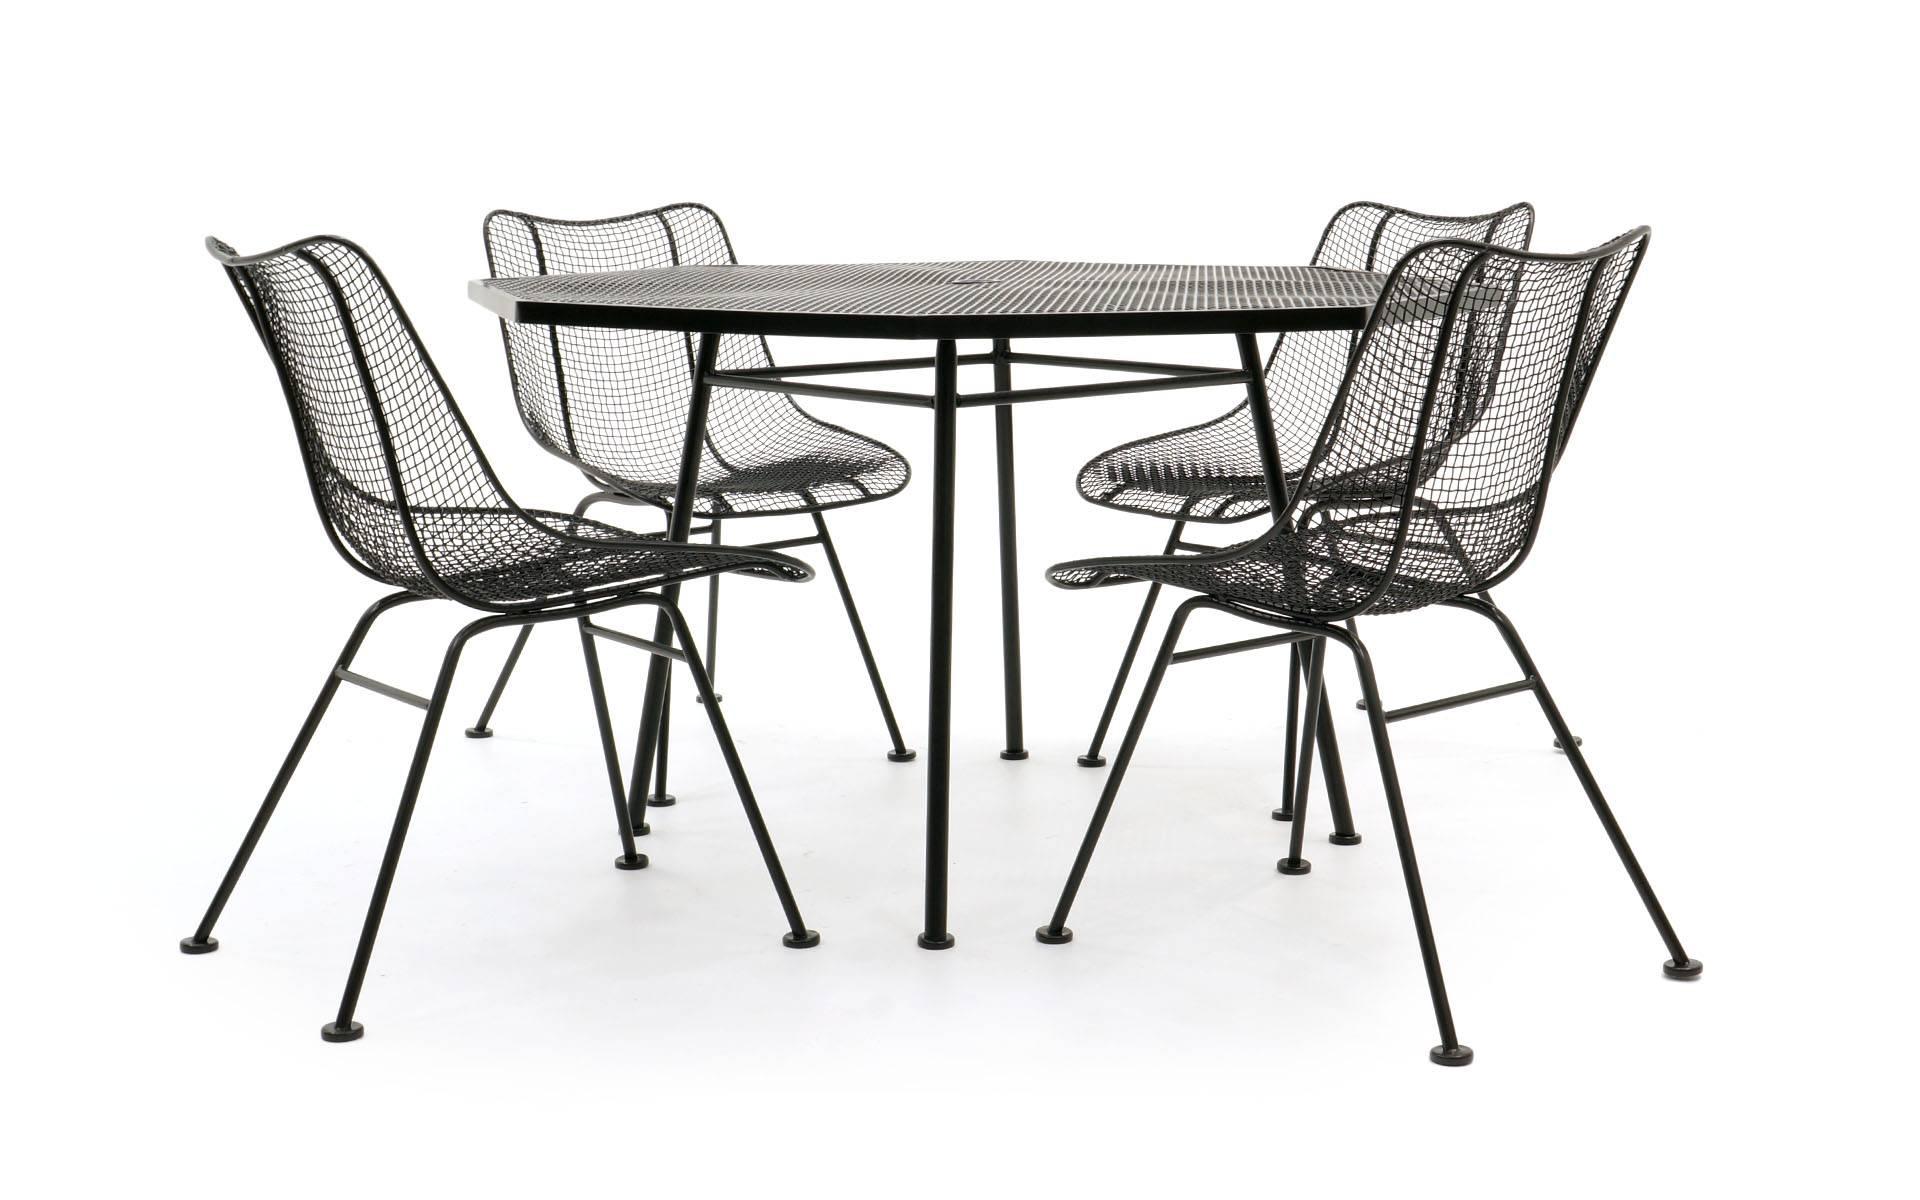 Two octagonal Russell Woodard dining tables, each with four woven wire Sculptura armless dining chairs. Eight chairs total. Professionally media blasted and powder coated in a satin black. Never outdoors since restoration. Price is for both sets. We